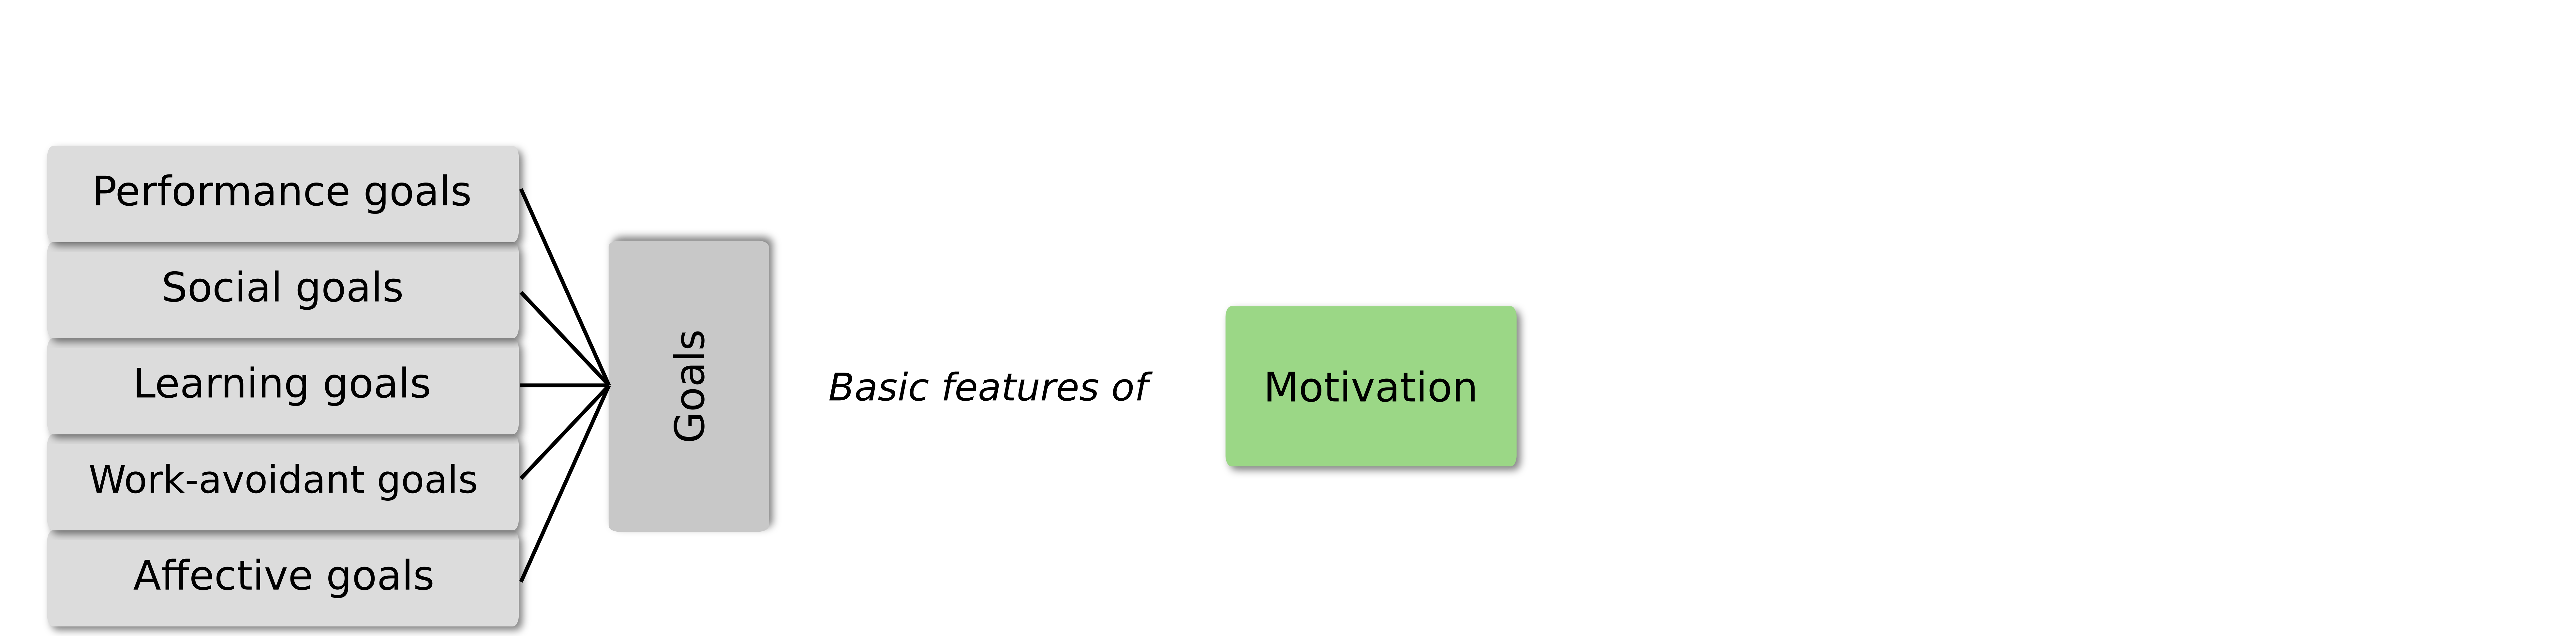 2 main boxes: a grey one with "Goals" written in it, a green one with "Motivation" in it. 5 smaller boxes stacked on each other on the left of the "Goals" box with "Performance goals", "Social goals", "Learning goals", "Work-avoidant goals", "Affective goals" written inside. "Basic features of" is written between "Goals" and "Motivation". 